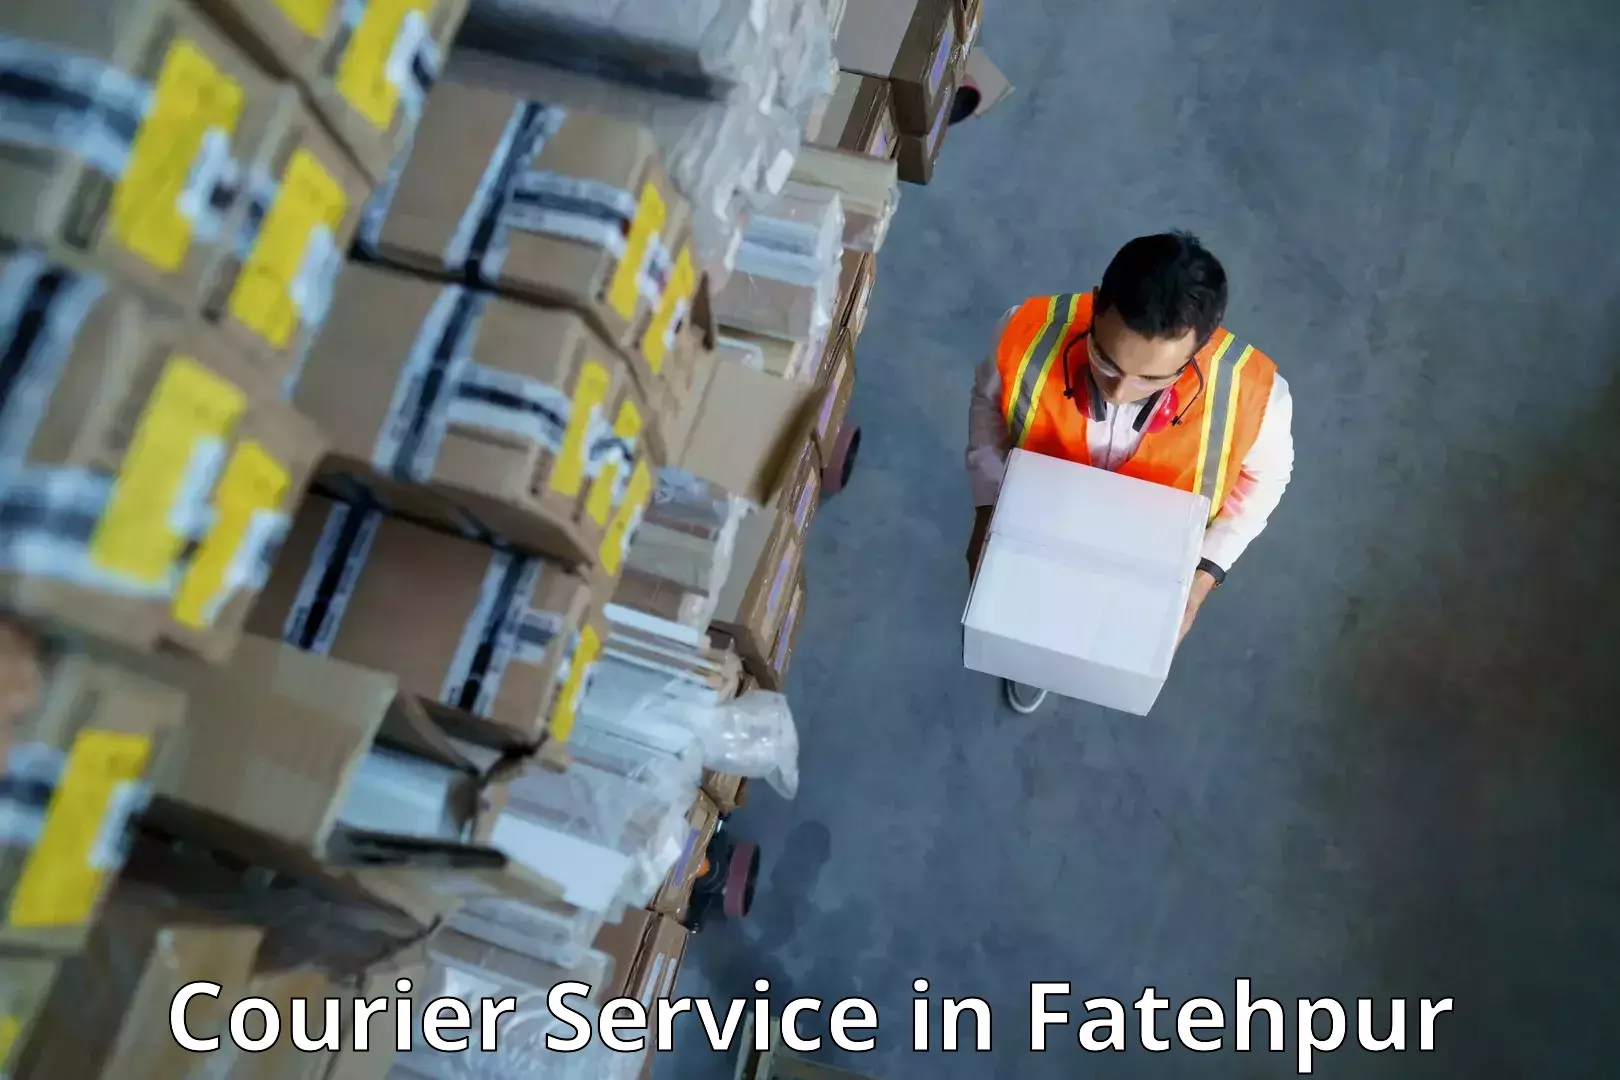 Courier service innovation in Fatehpur